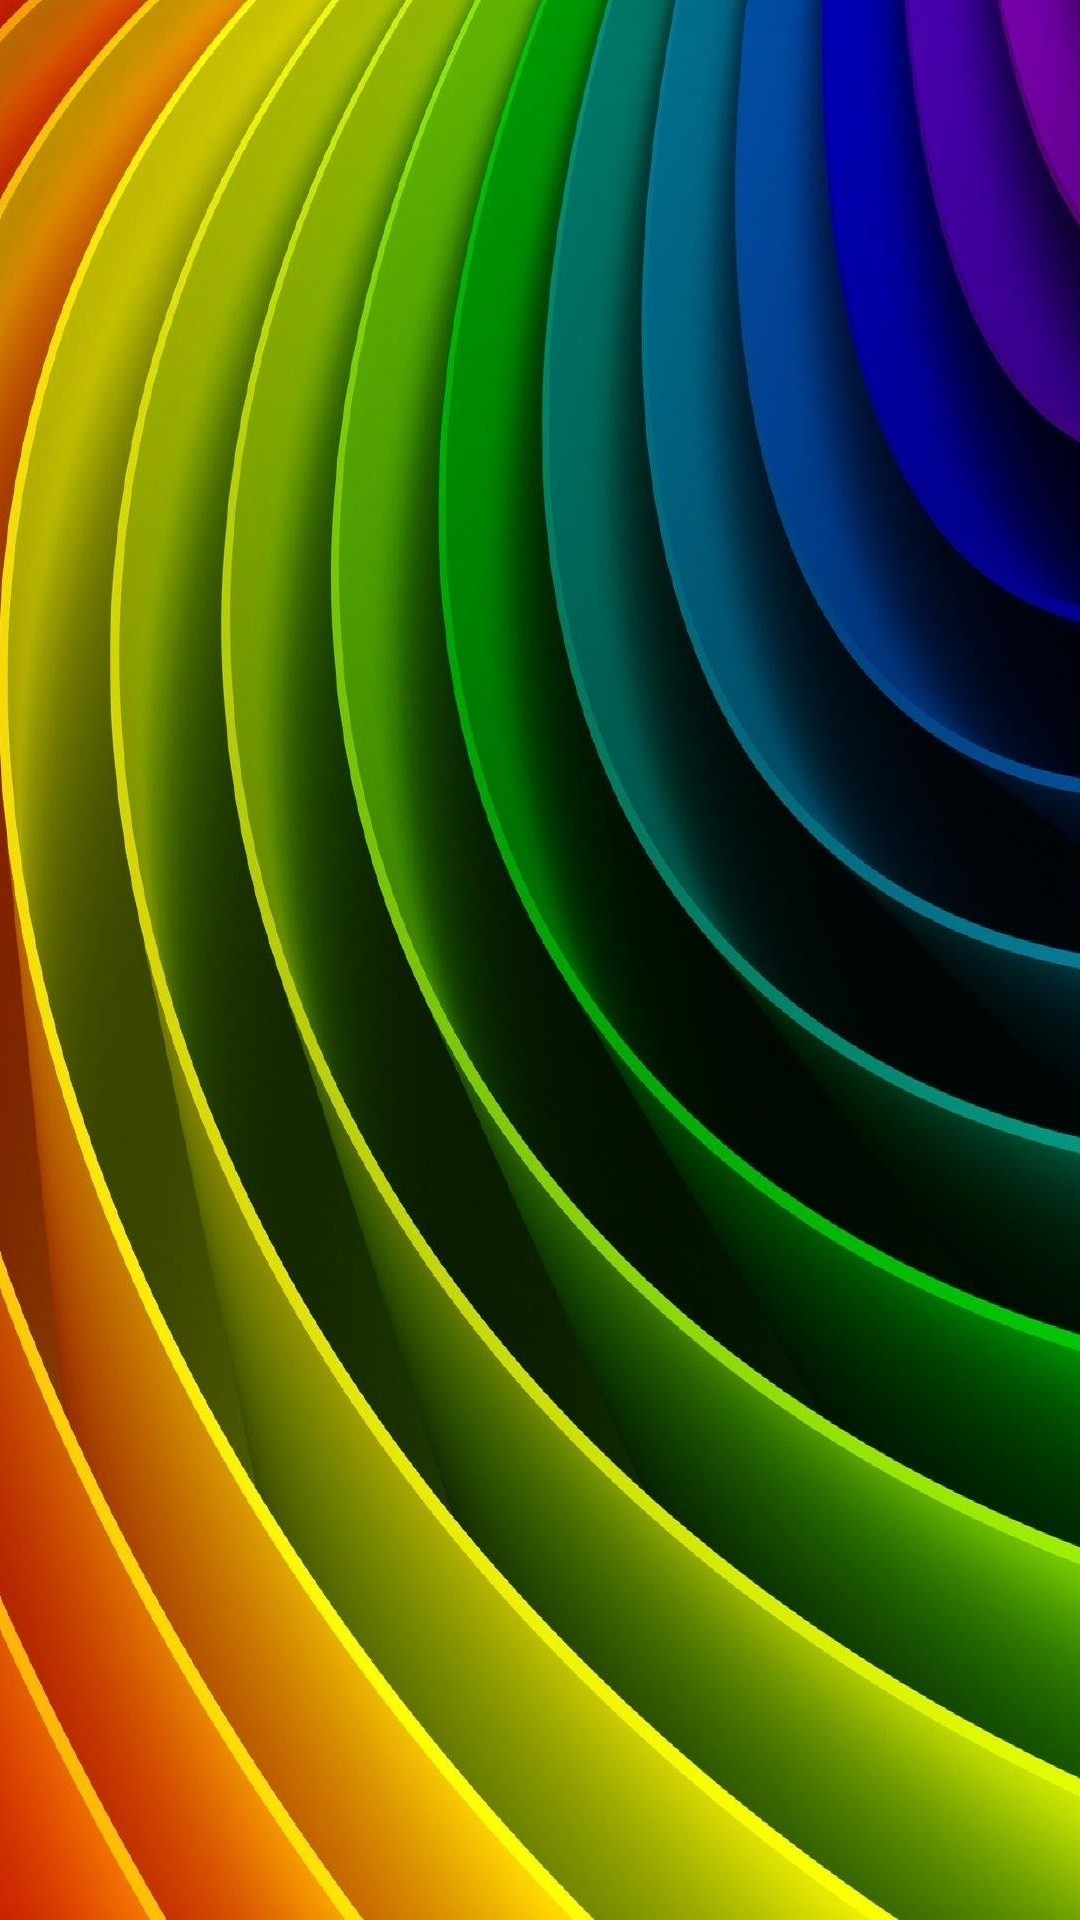 3D HD wallpaper for mobile free download, green, spiral, circle, yellow, colorfulness